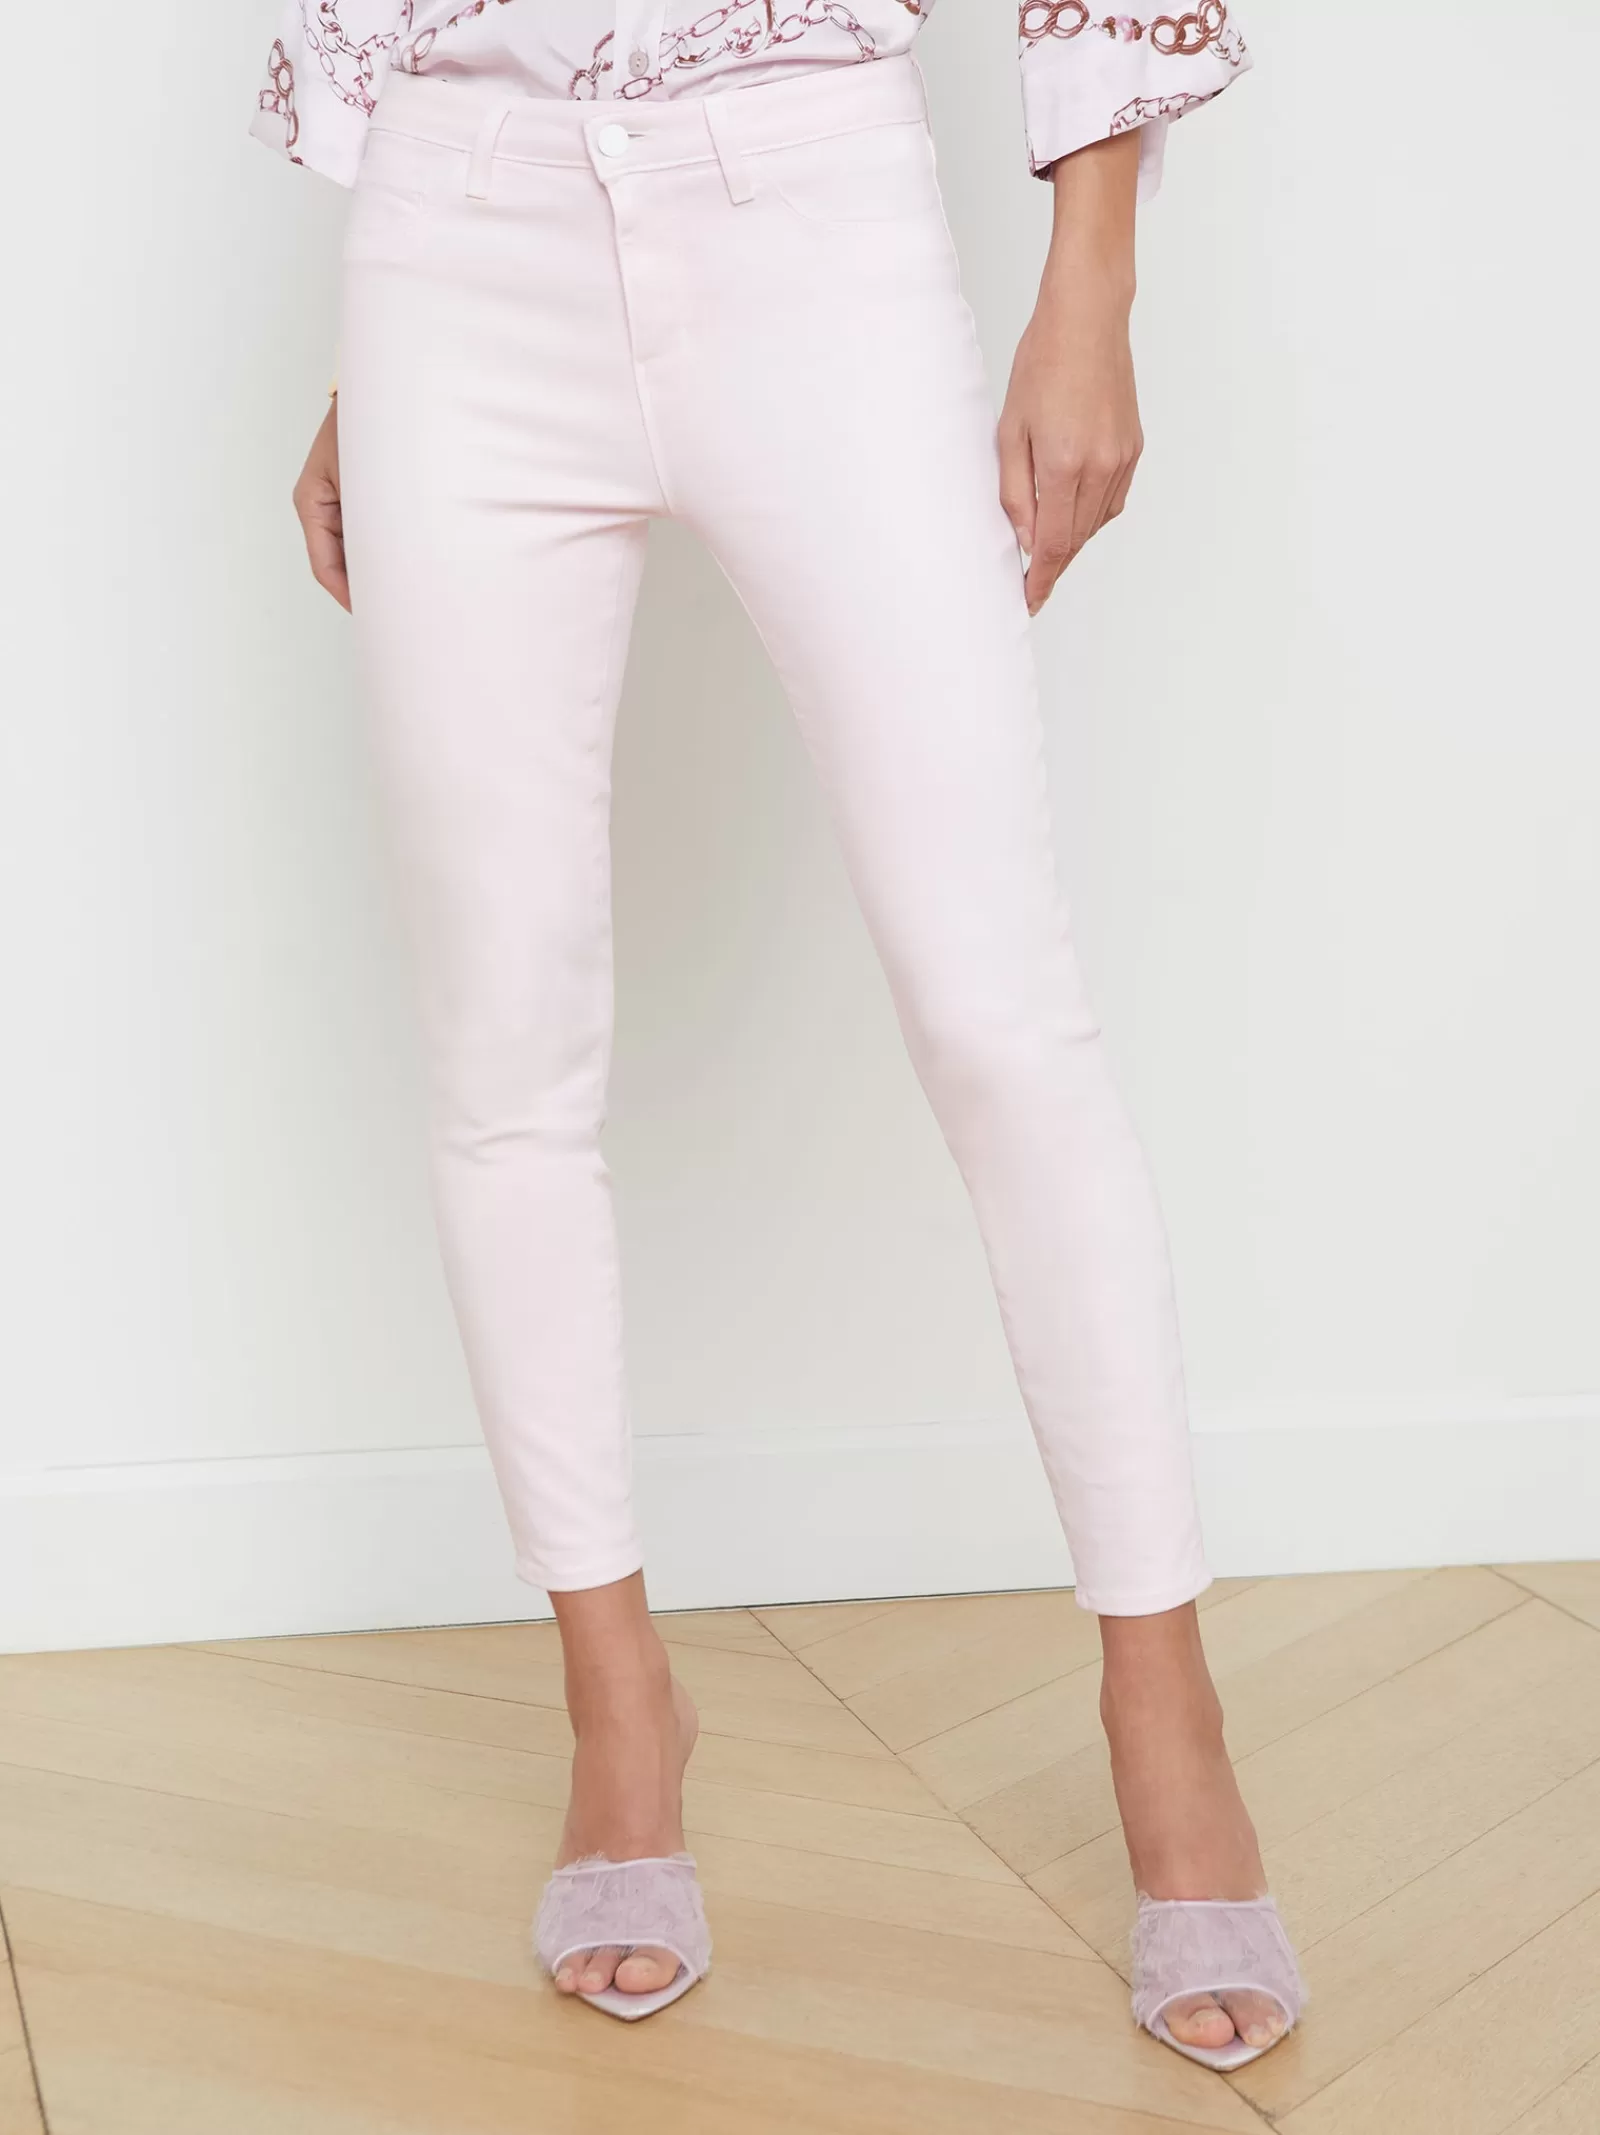 L'AGENCE Margot Coated Skinny Jean< Spring Collection | Petite